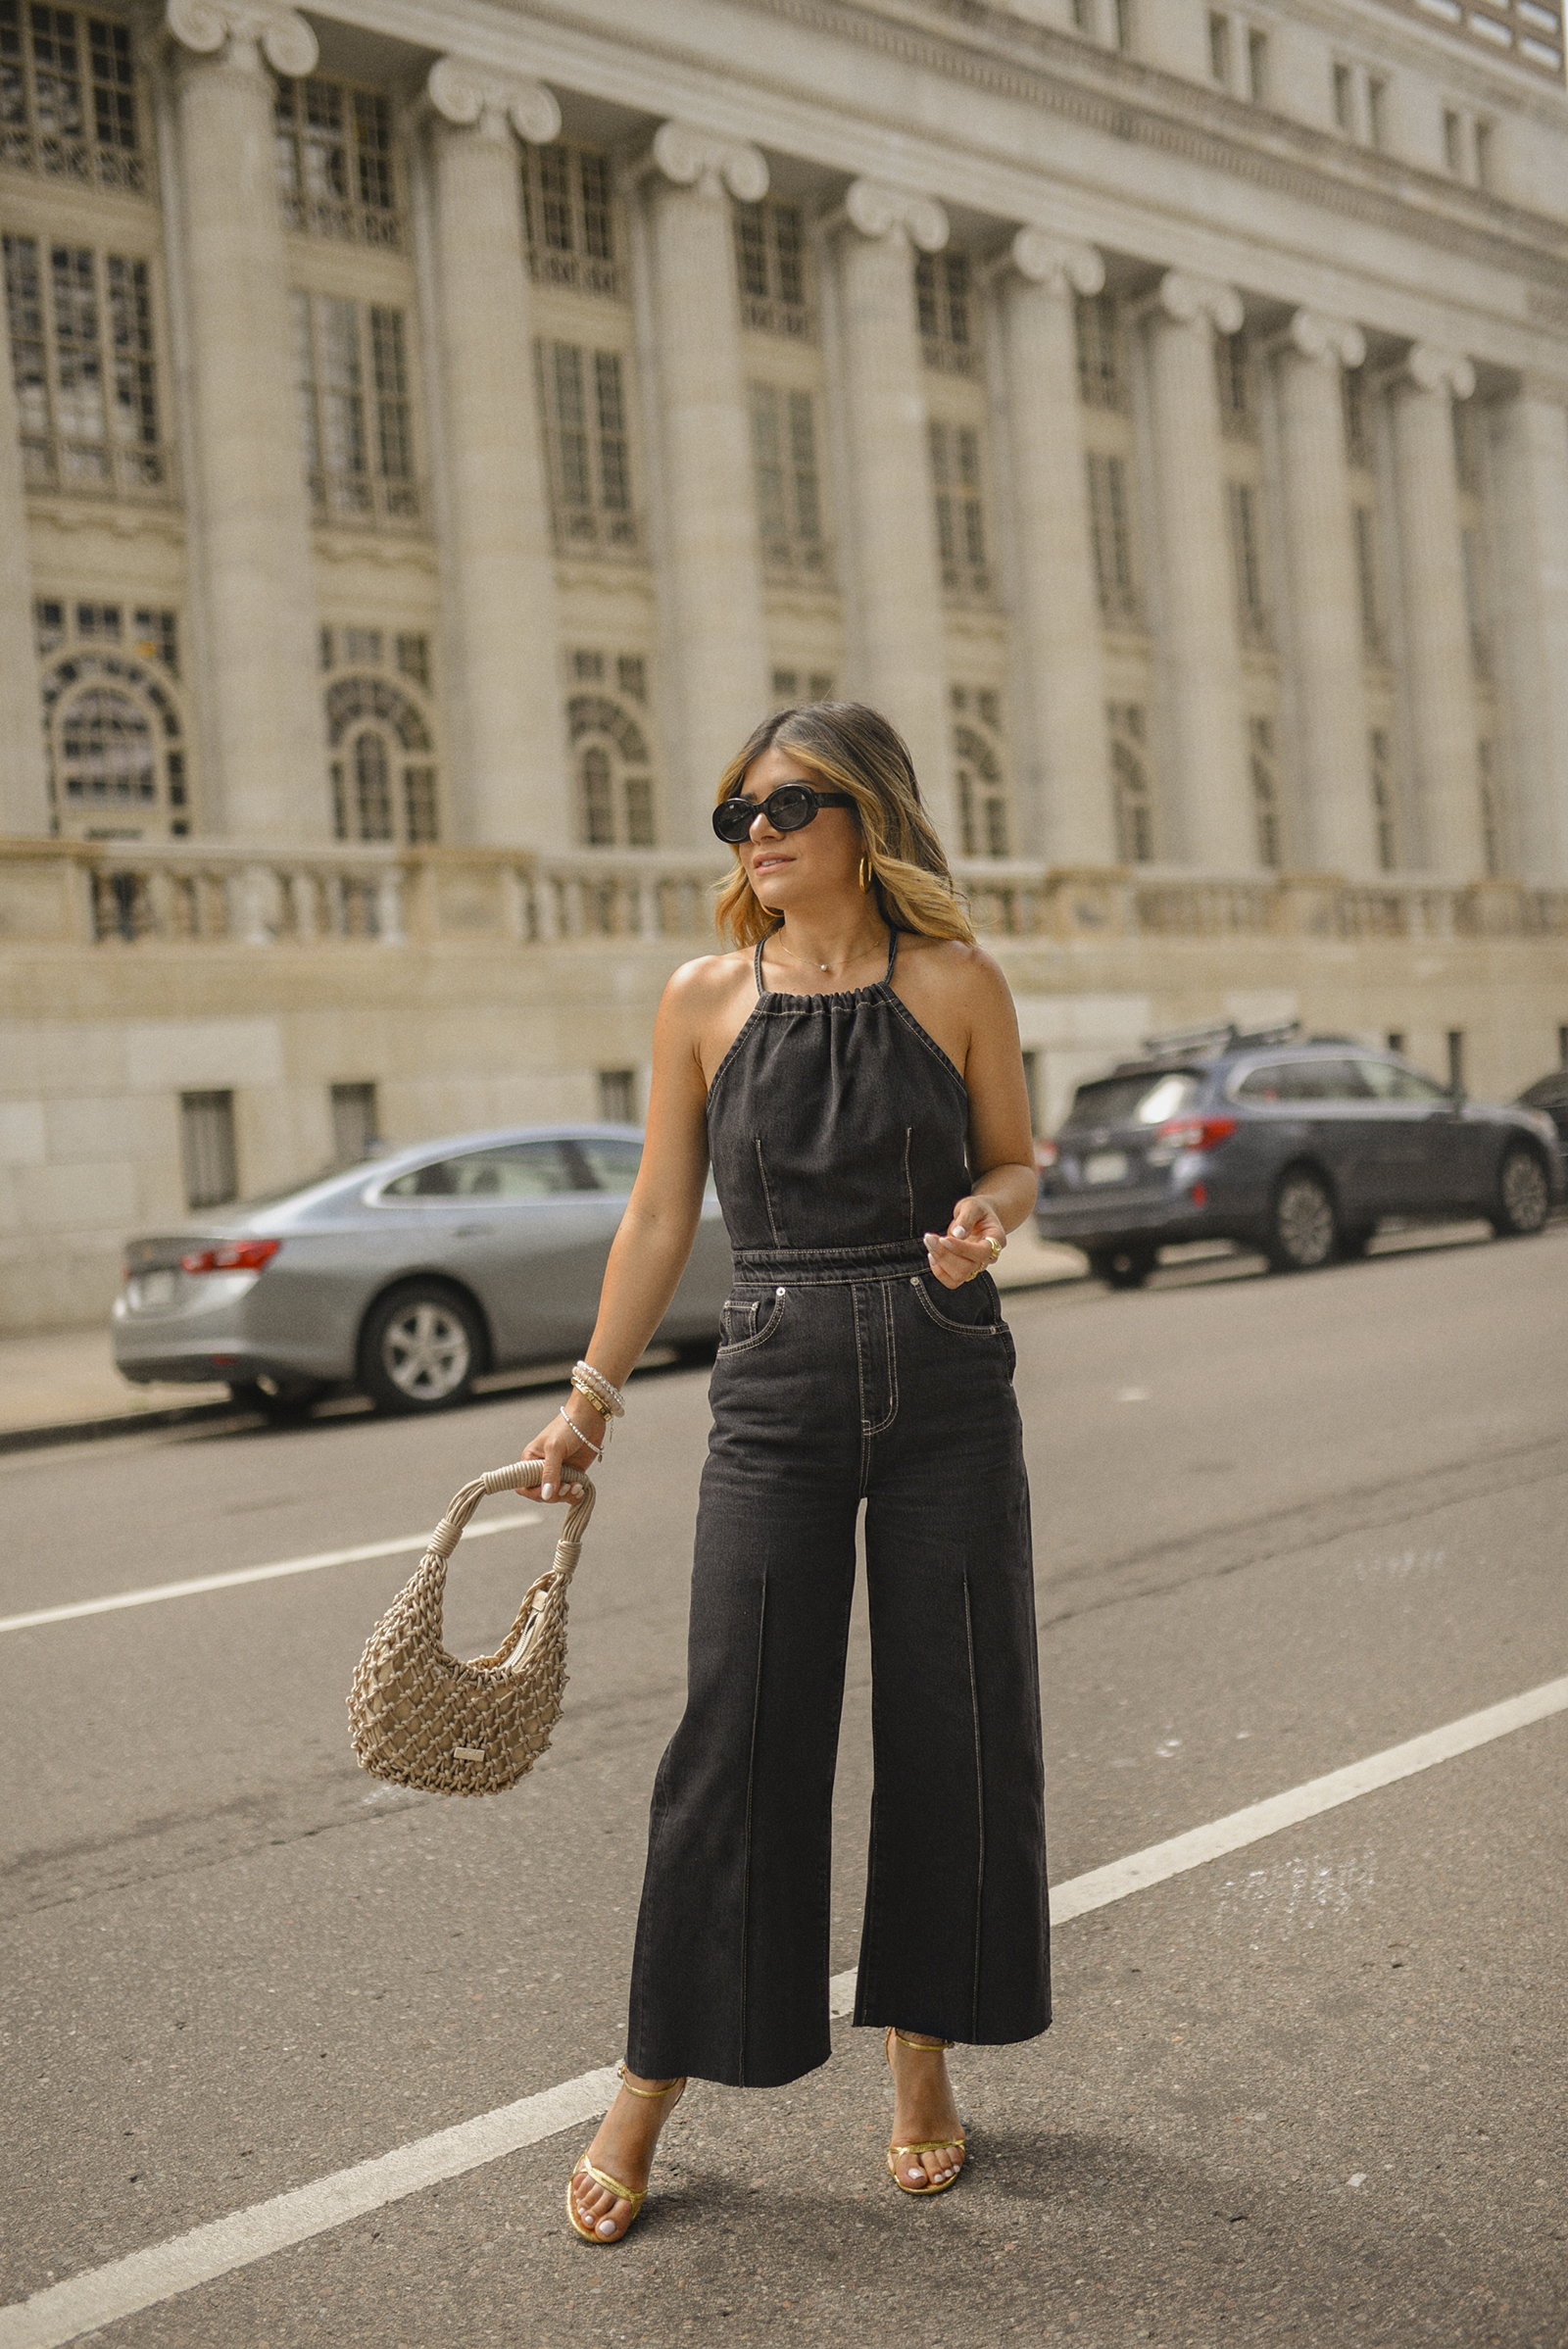 Denim Jumpsuit Outfits That Will Have You Channeling the 1970s - College  Fashion